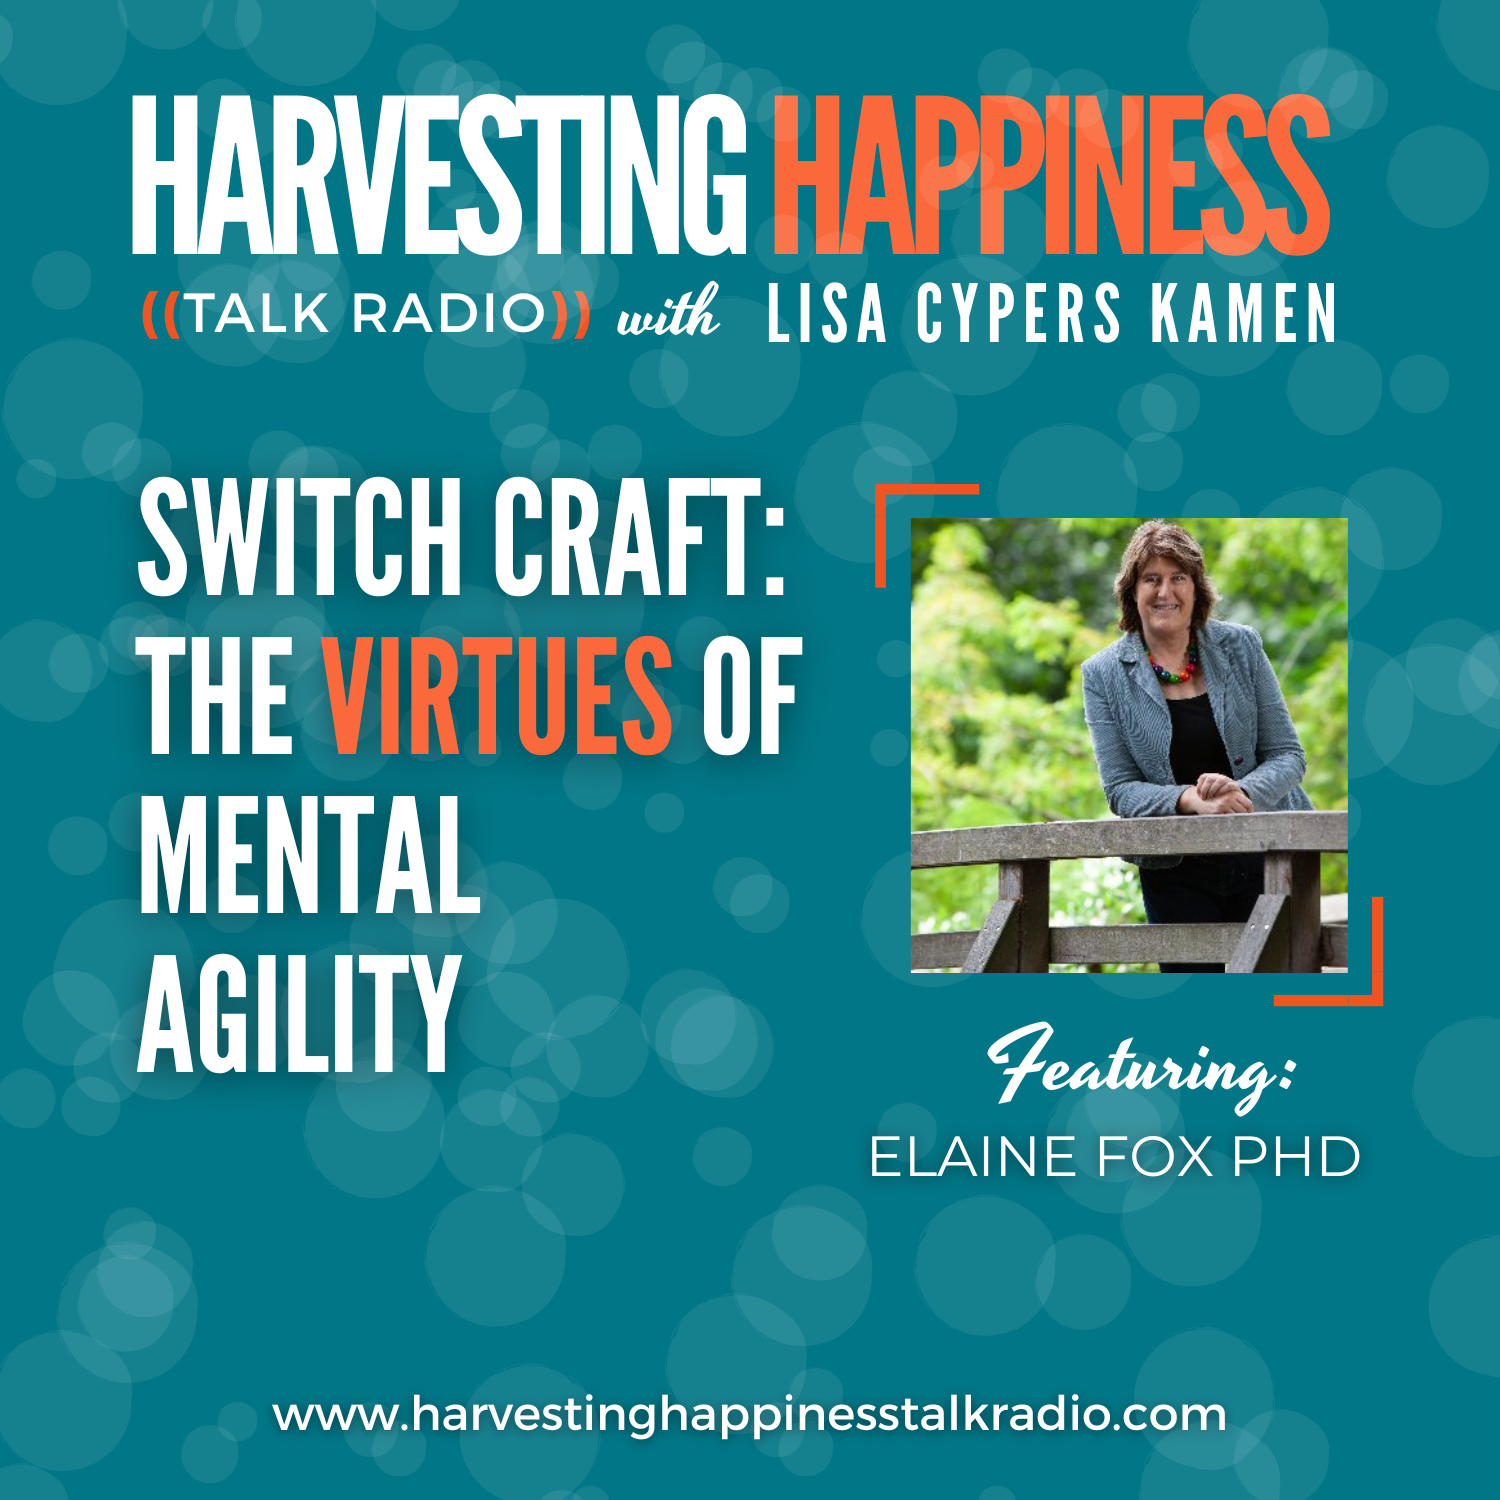 Podcats about mental agility with Elaine Fox and Lisa Cypers Kamen